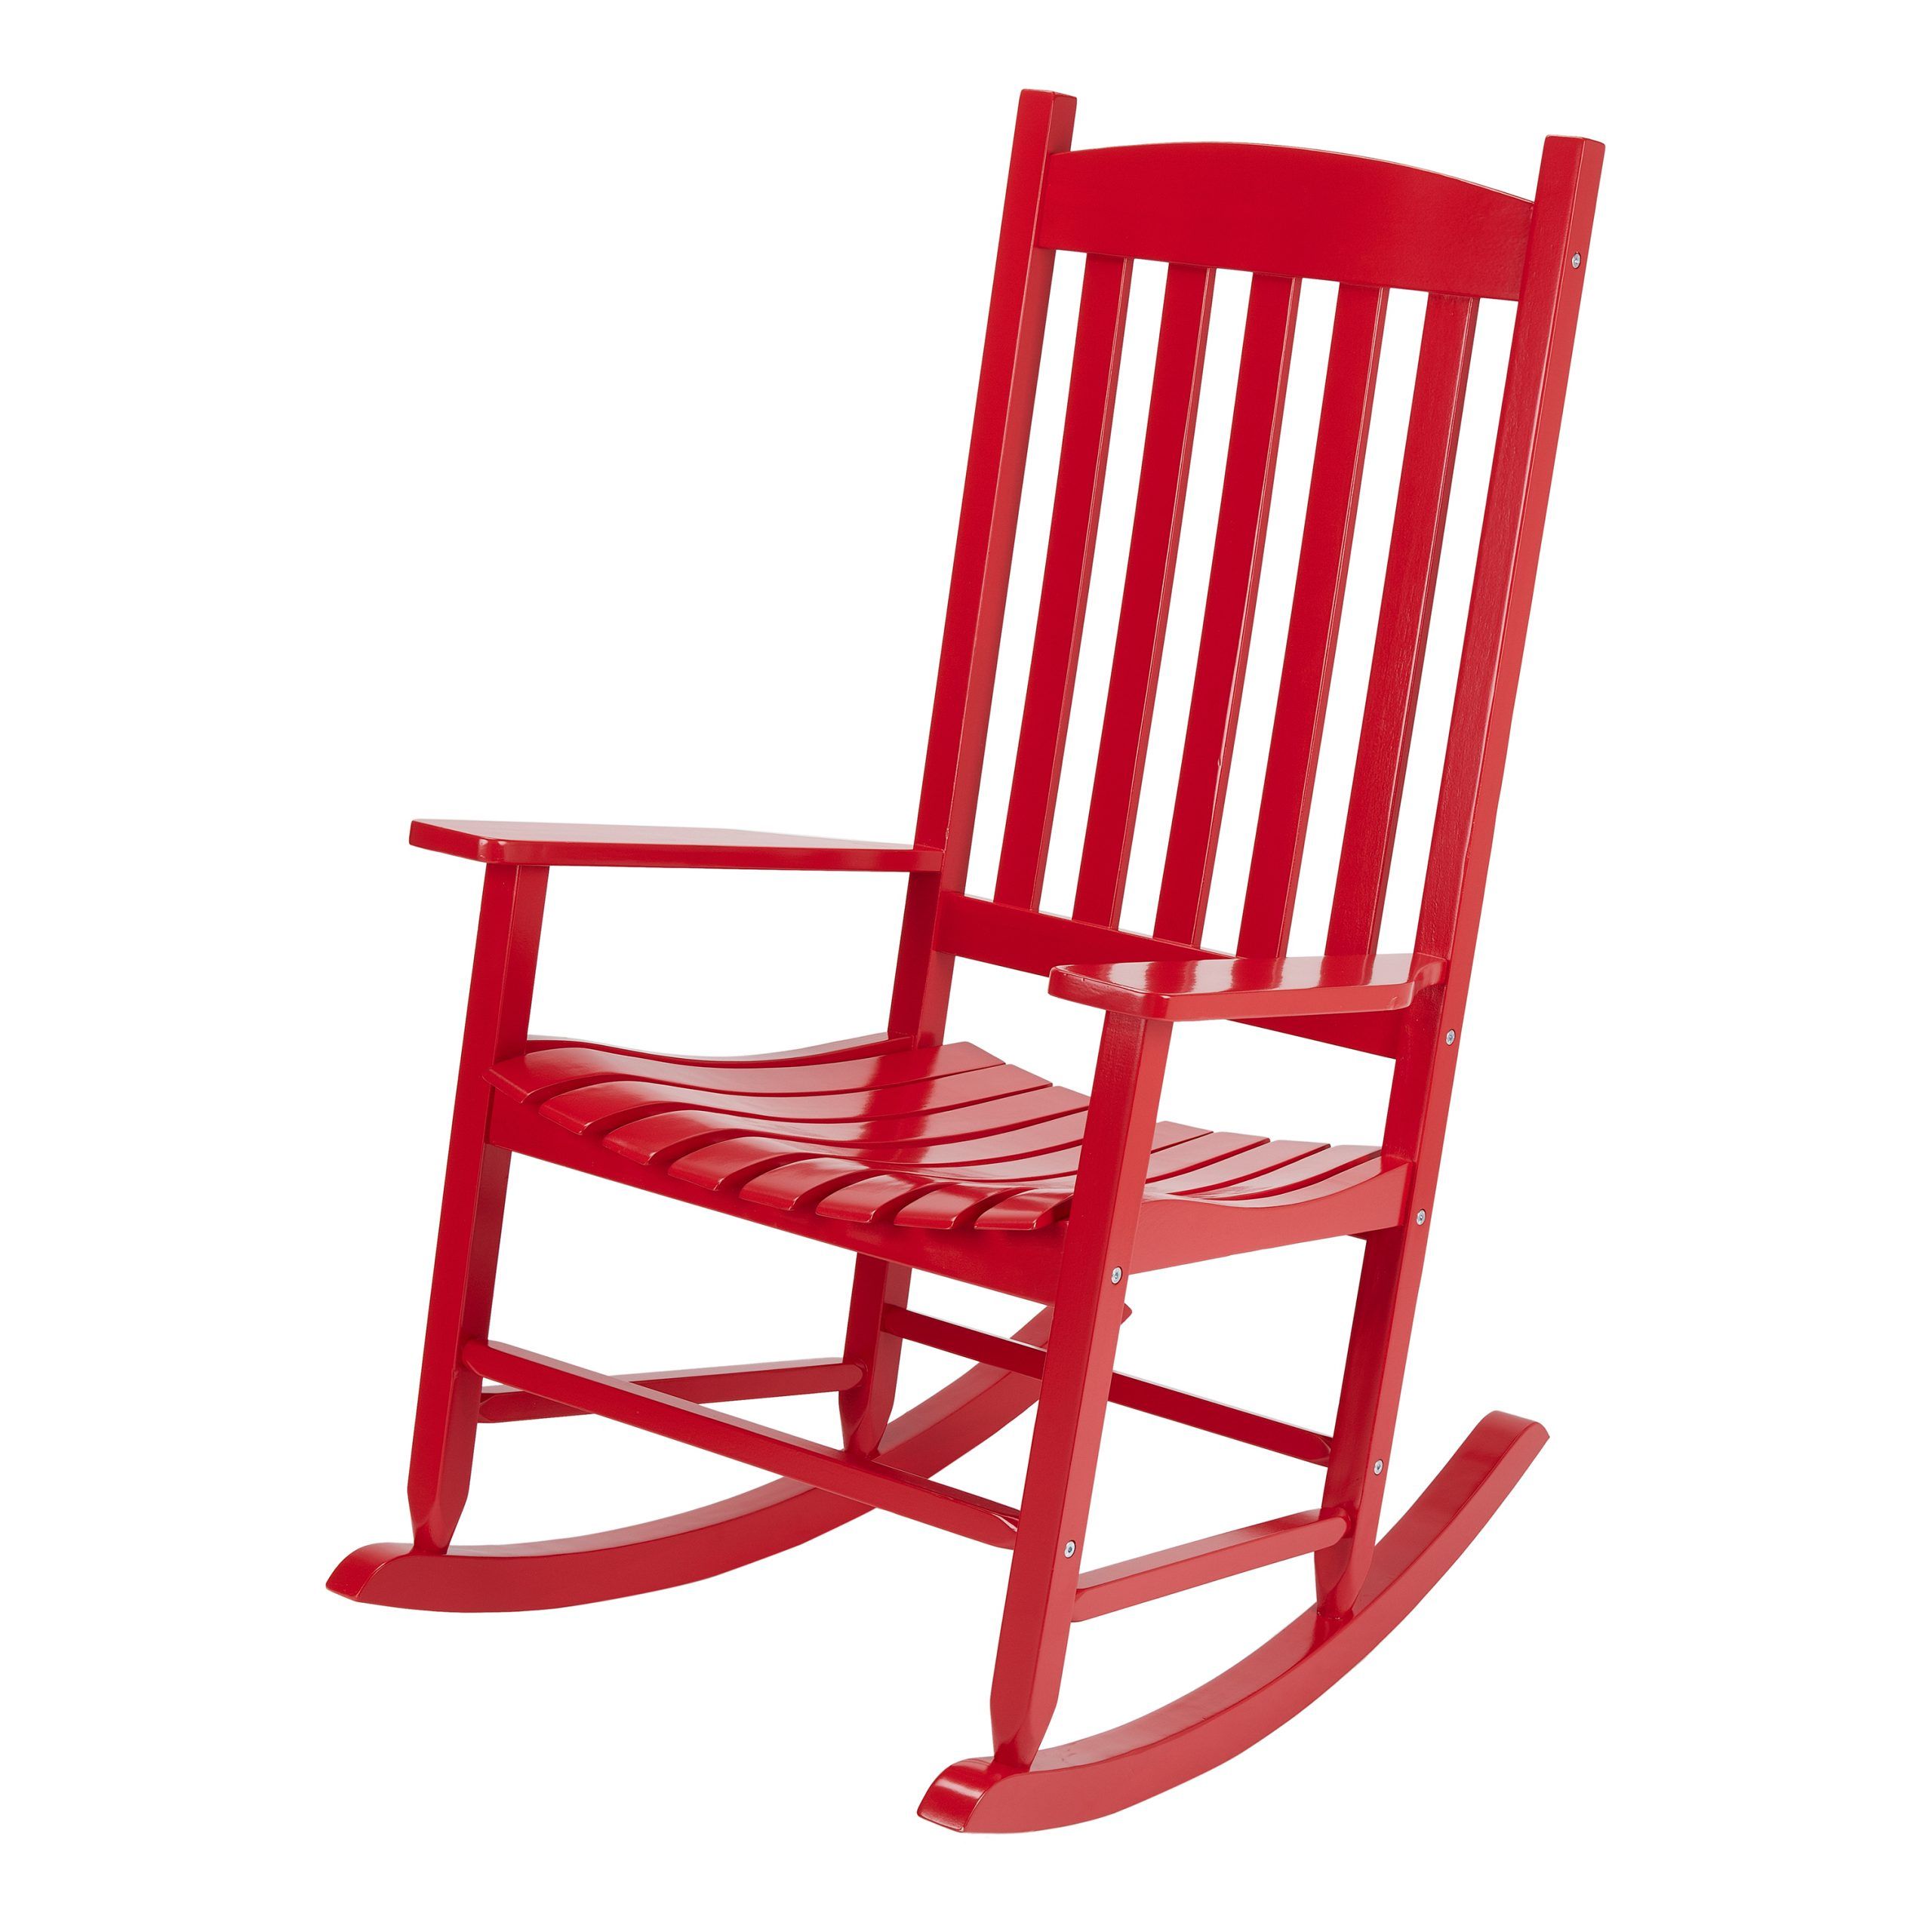 Mainstays Outdoor Wood Slat Rocking Chair, Red – Walmart – Walmart For Monnatural Wood Outdoor Folding Tables (View 14 of 15)